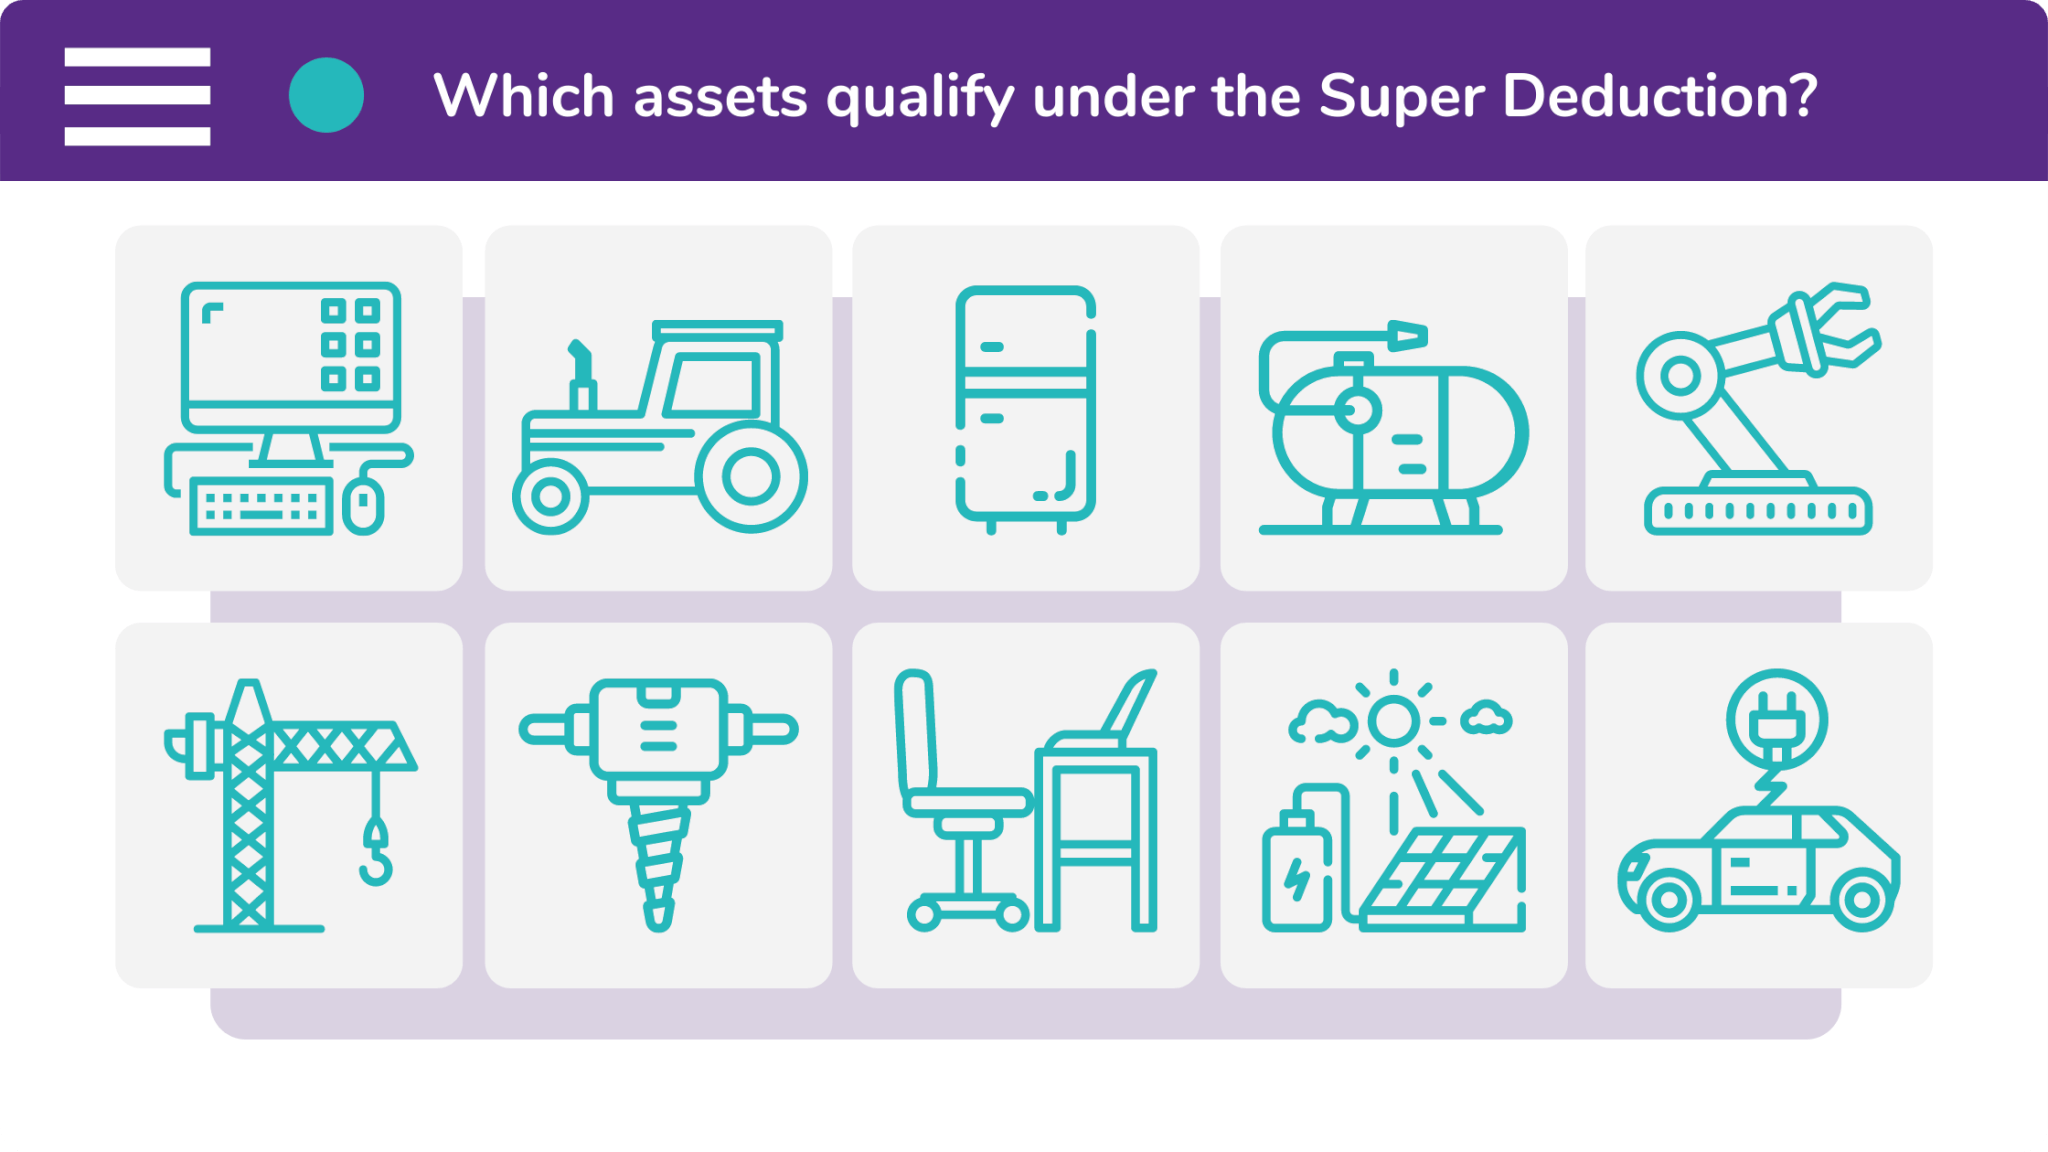 The UK government has published a non-exhaustive list of qualifying assets under the Super Deduction.